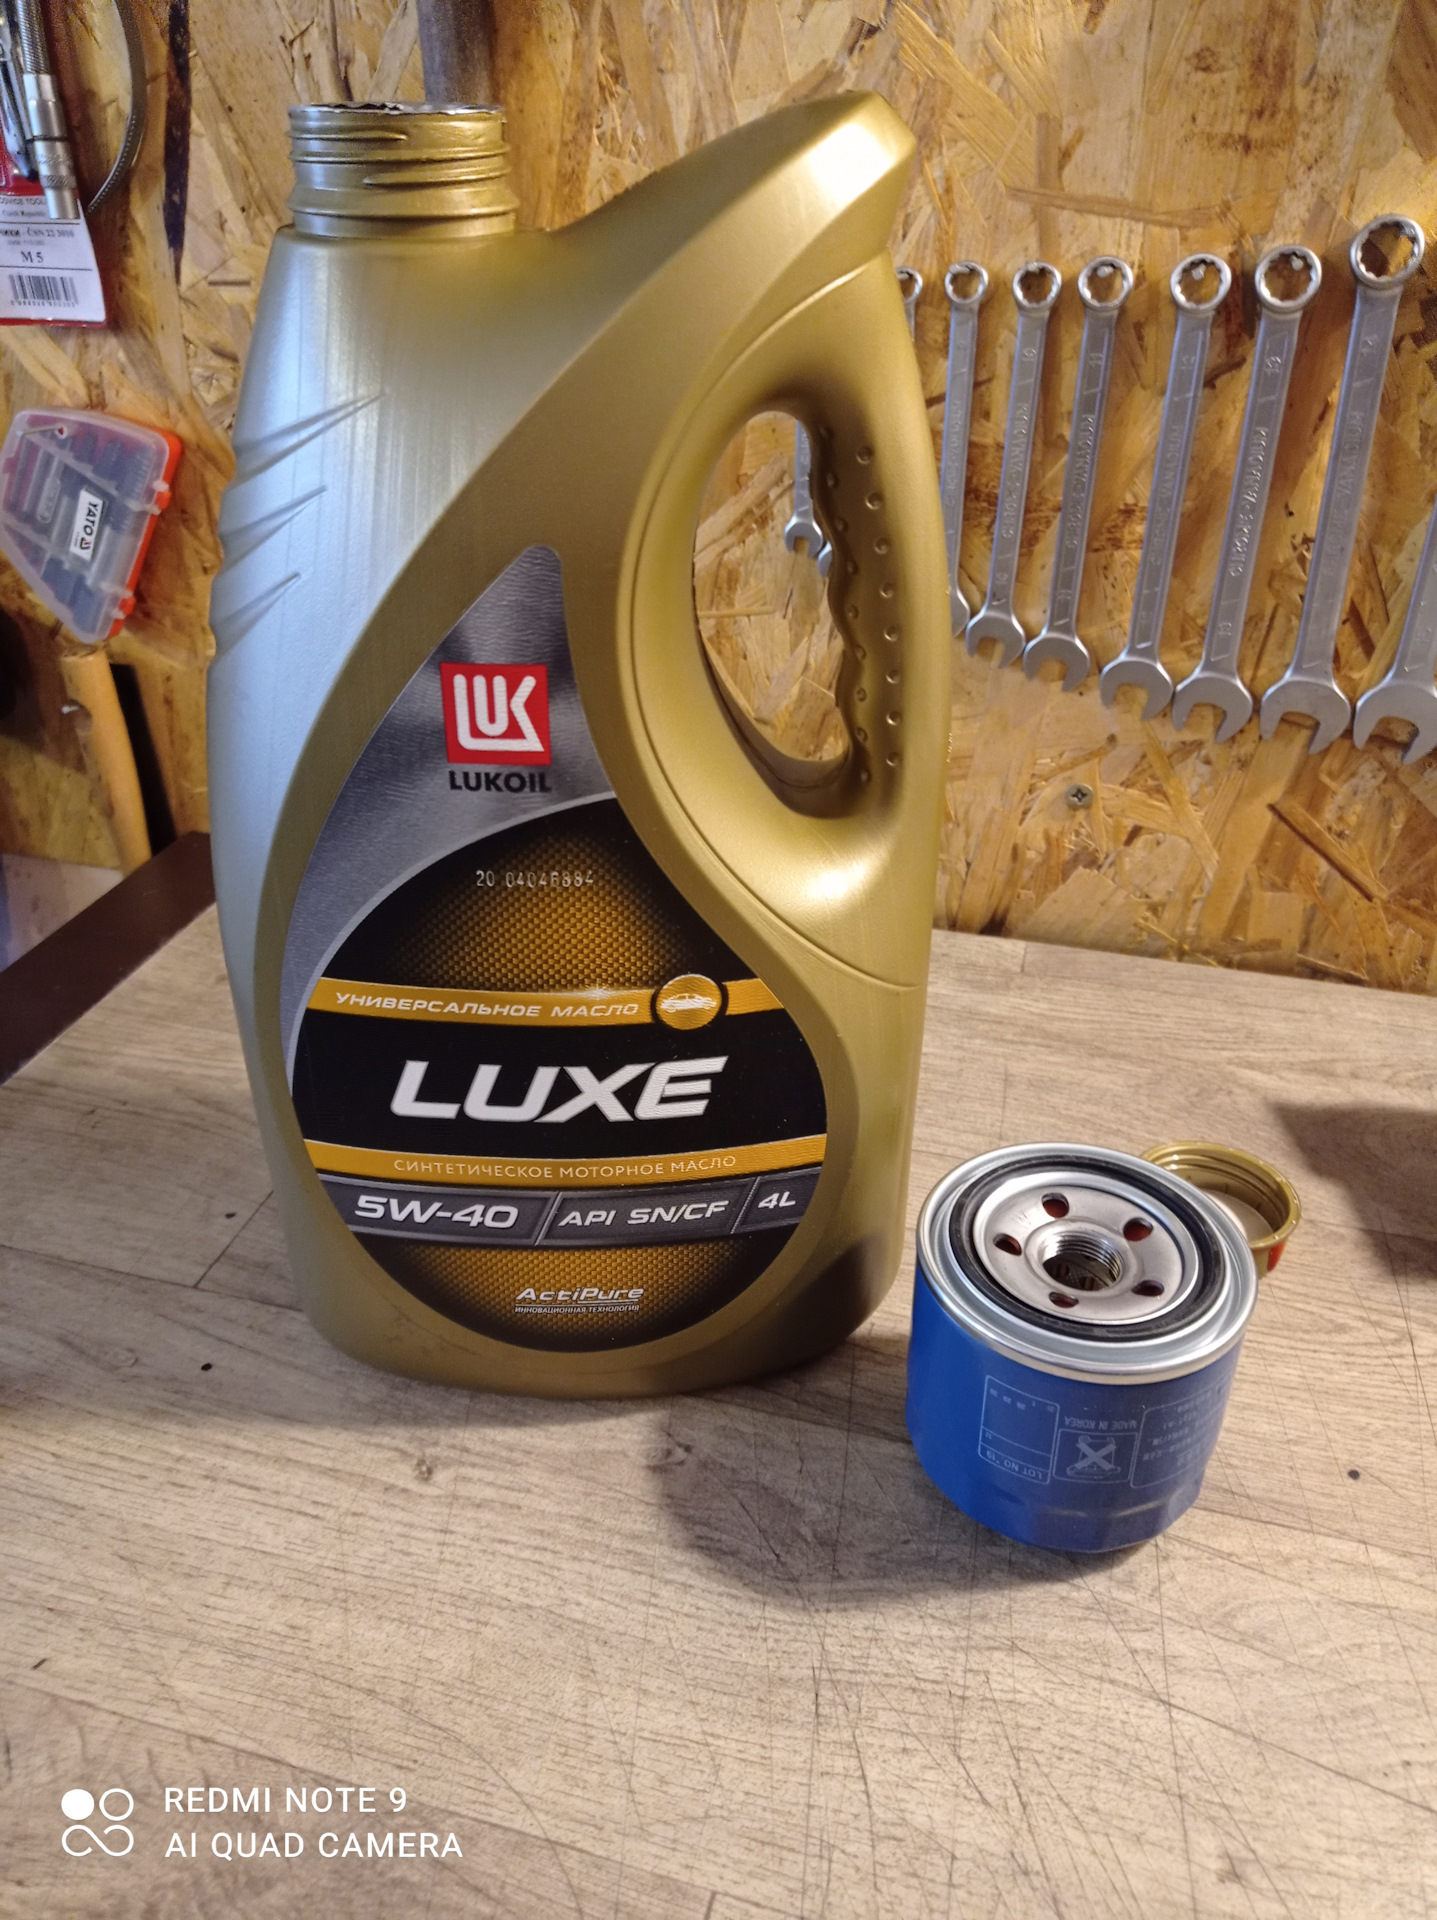 Масло элантра 5. Масло Lukoil Luxe 5w40. Lukoil Luxe 5w-40. Лукойл Люкс 5w40 2023. Лукойл Люкс 10w 40 в Хендай акцент.